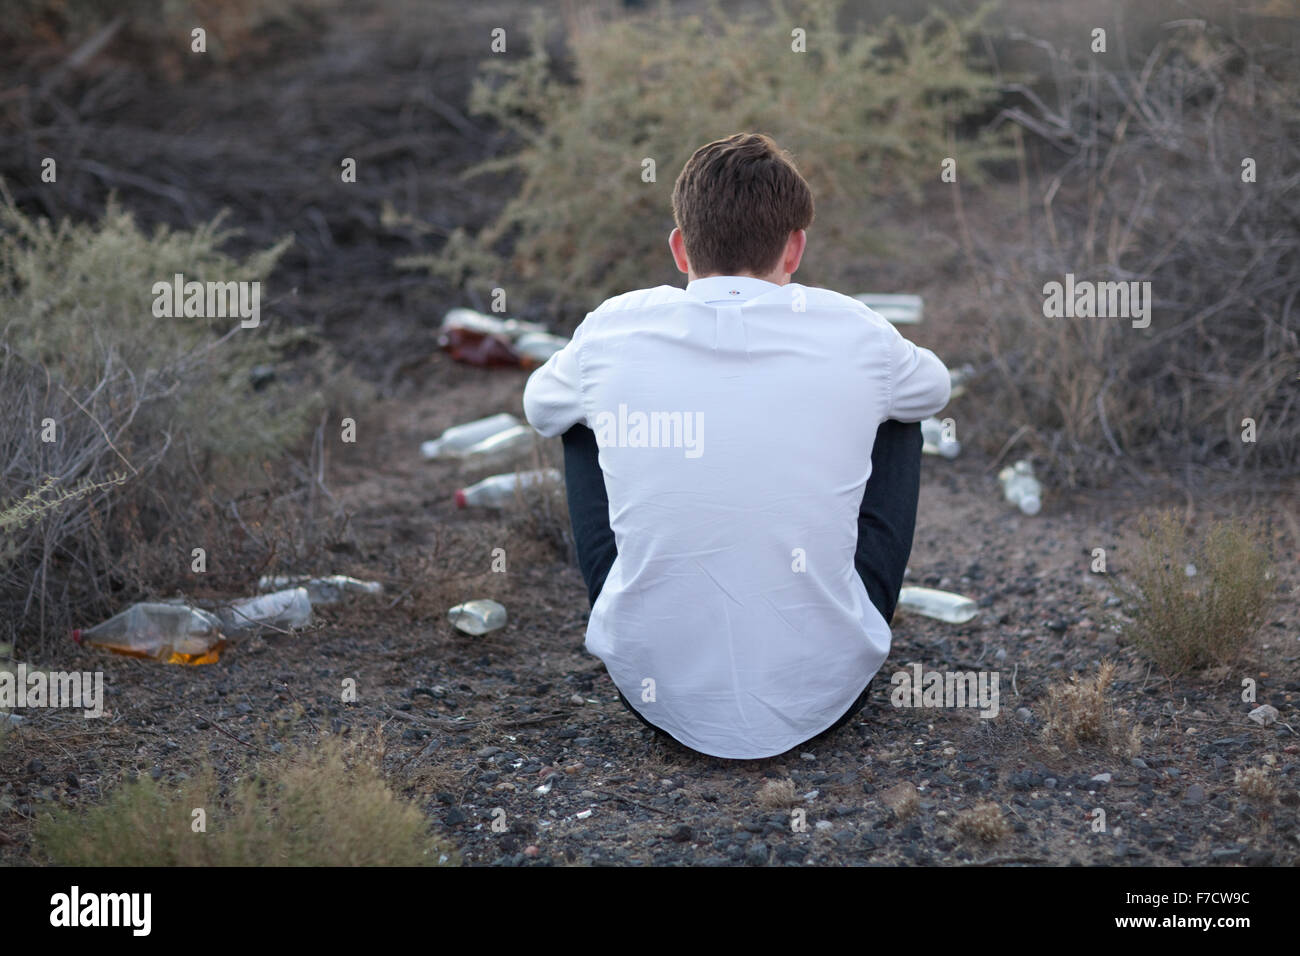 Teenage boy drinking alcohol outside, sitting in the dirt with empty bottles. Stock Photo